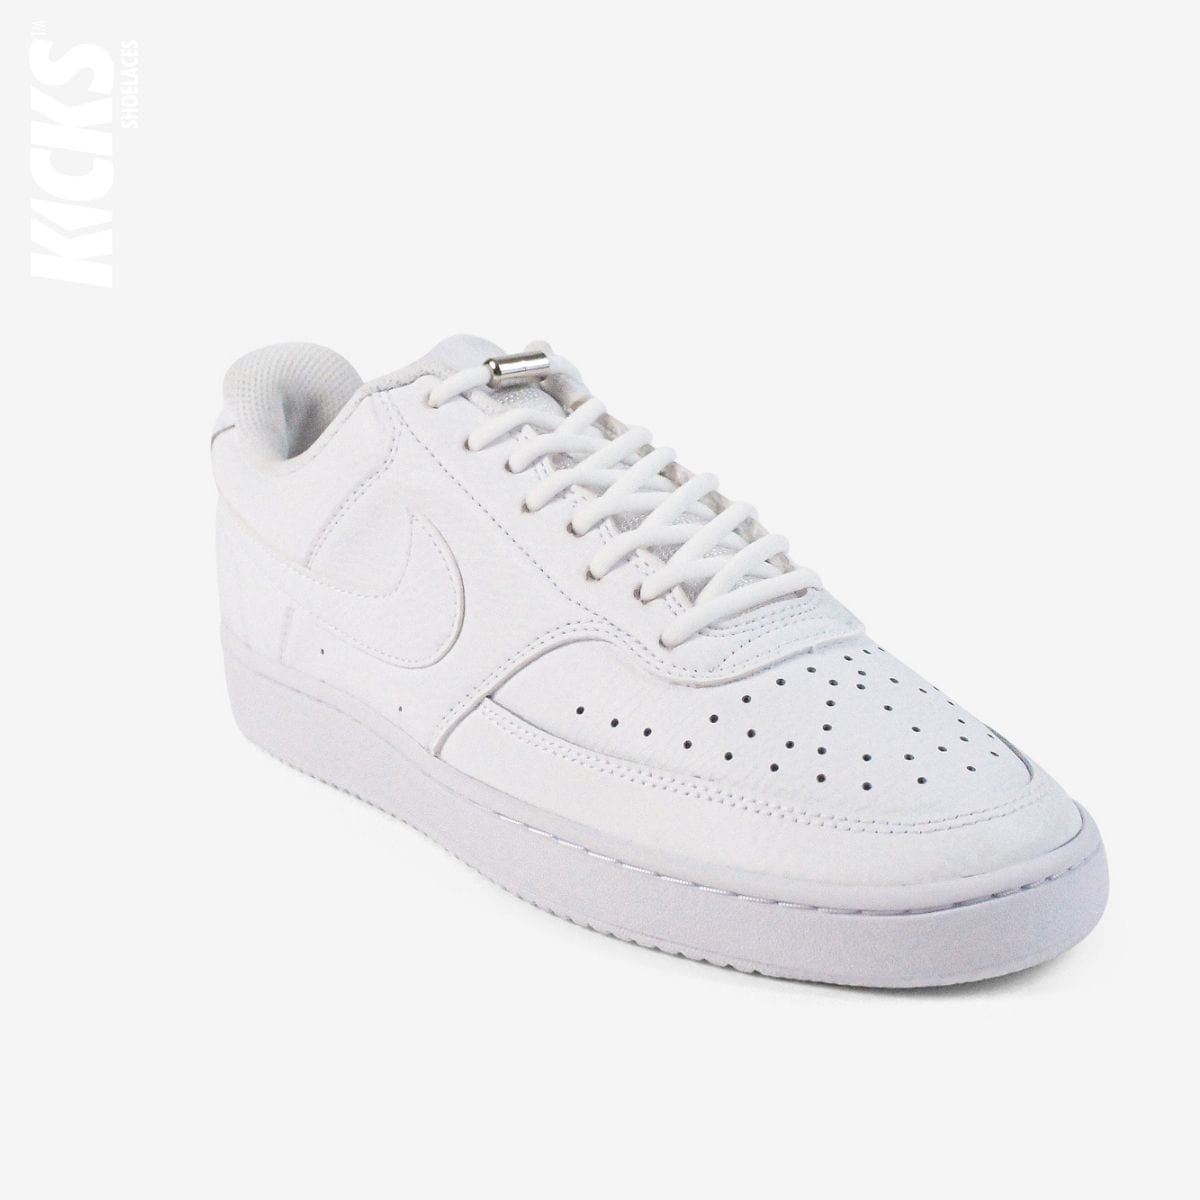 round-no-tie-shoelaces-with-white-laces-on-nike-white-sneakers-by-kicks-shoelaces